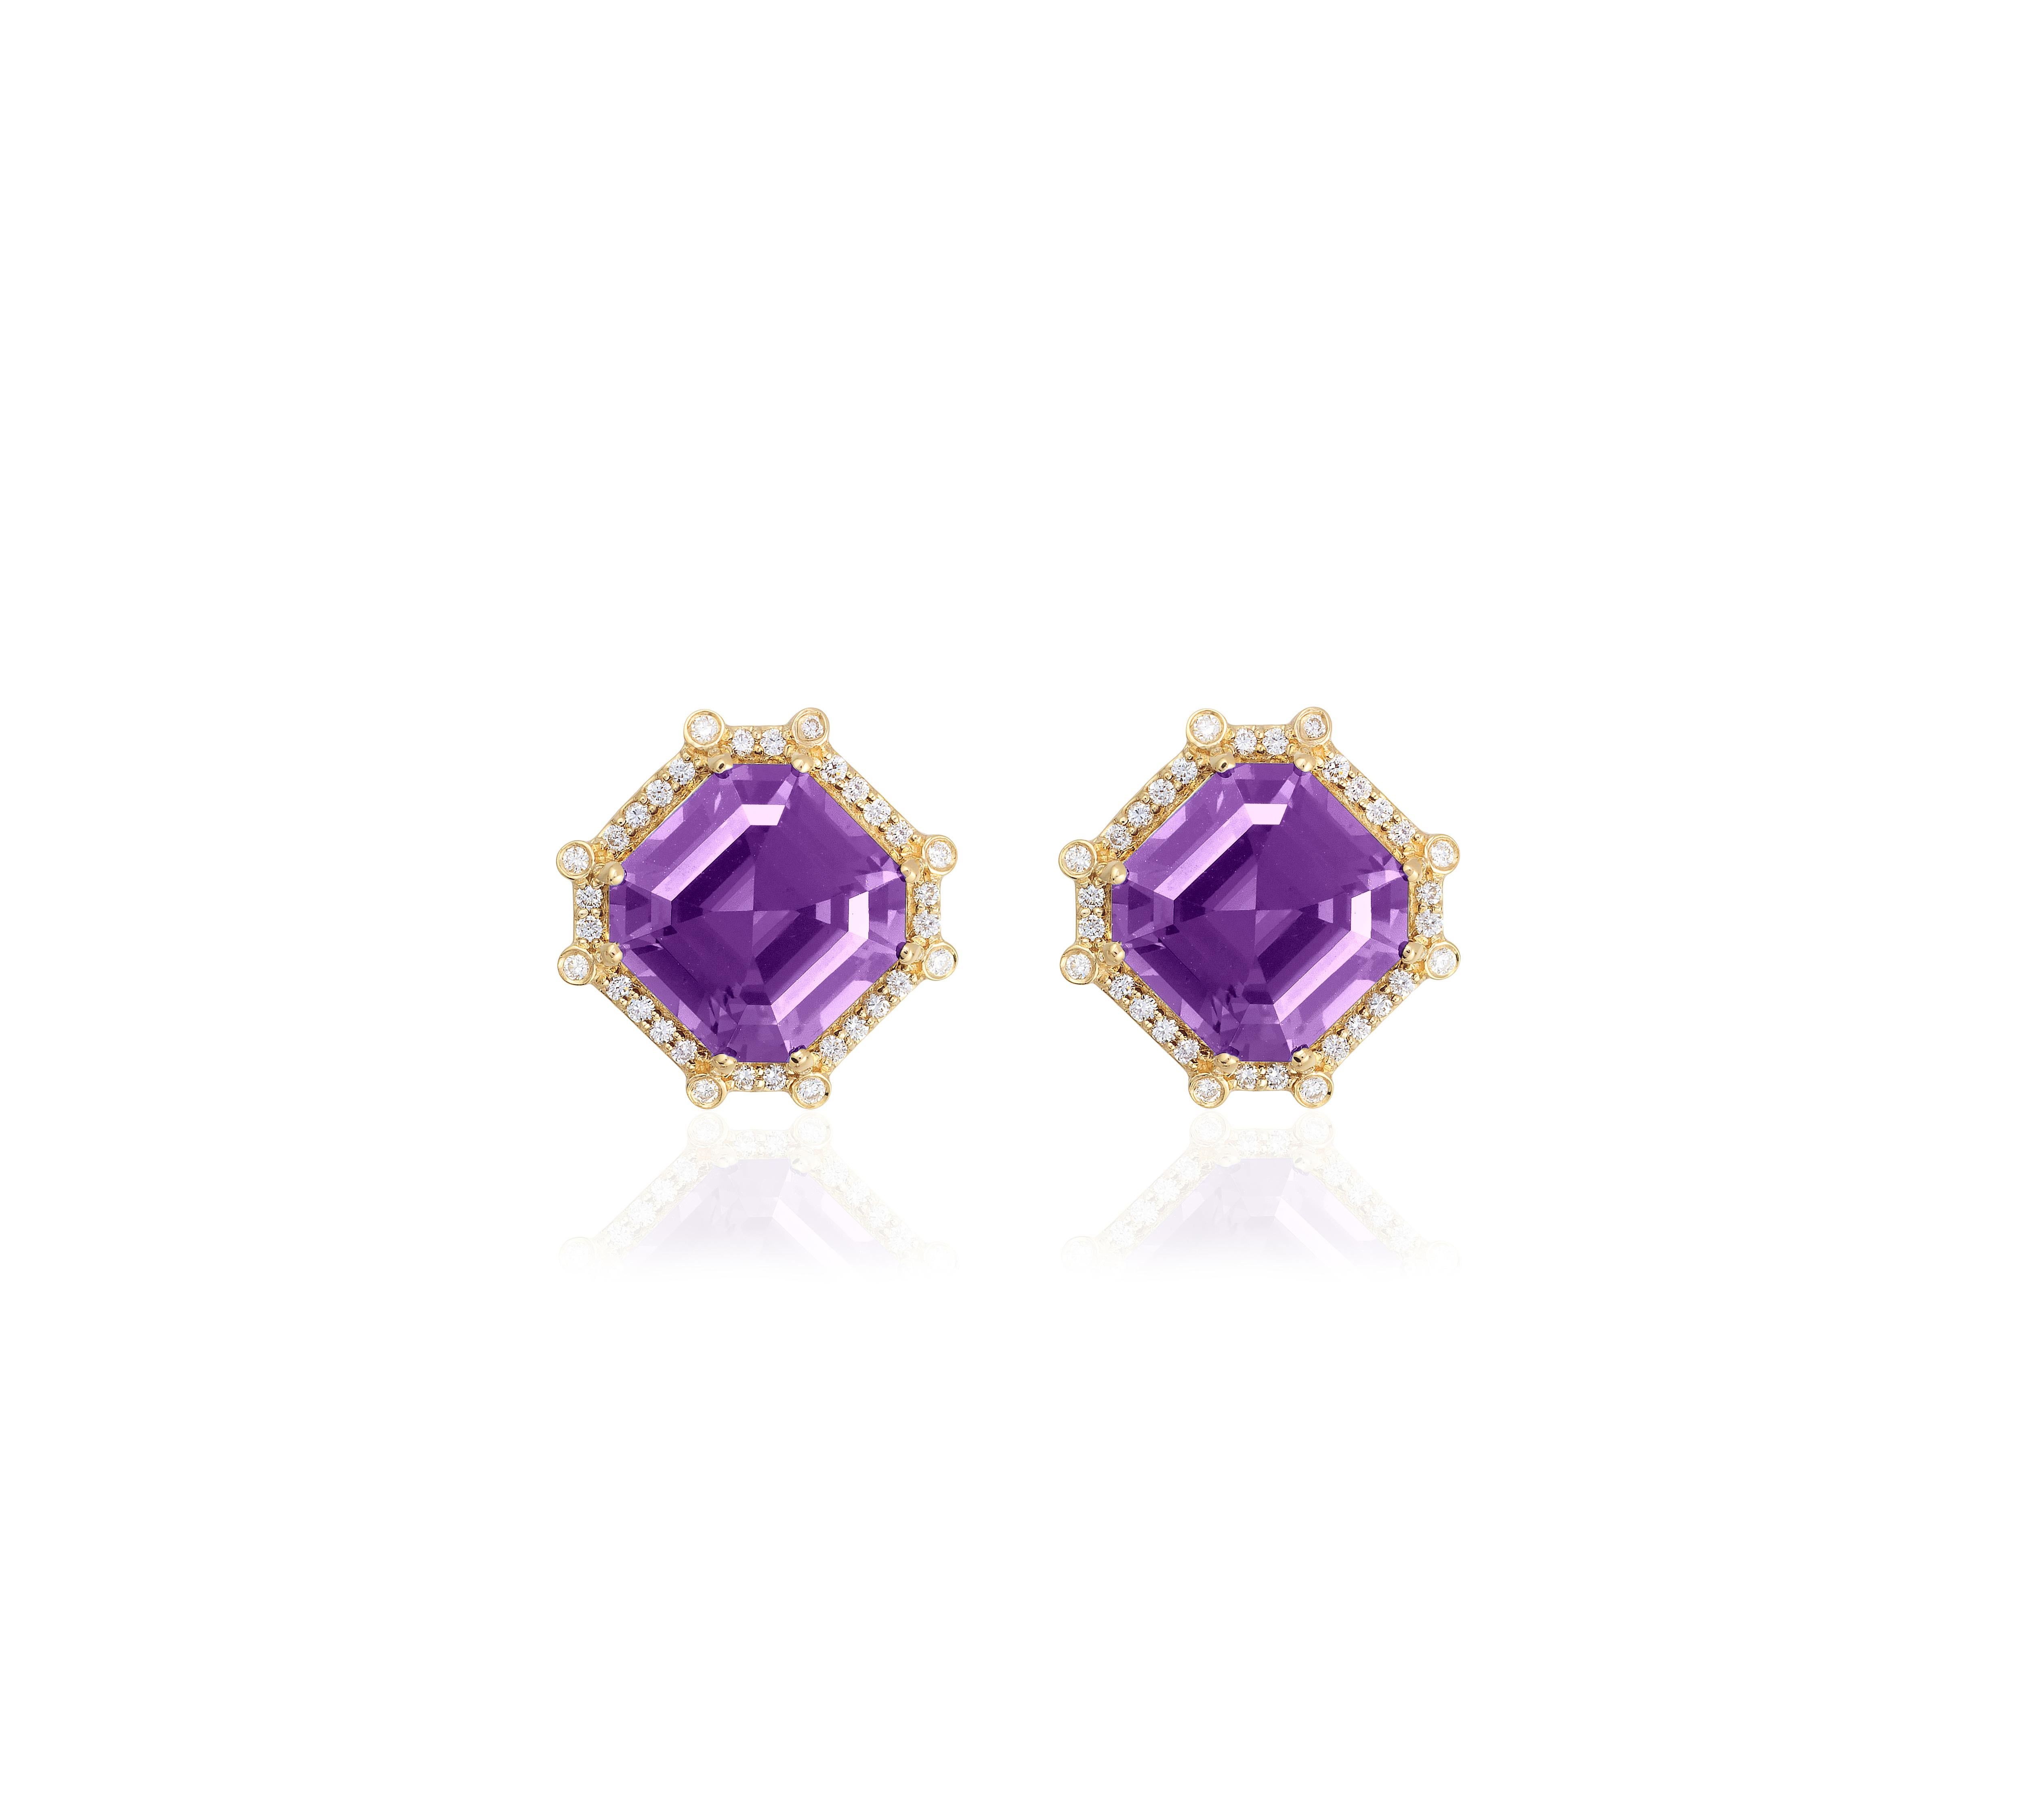 14k gold diamond earring with octagon amethyst manufacturer.